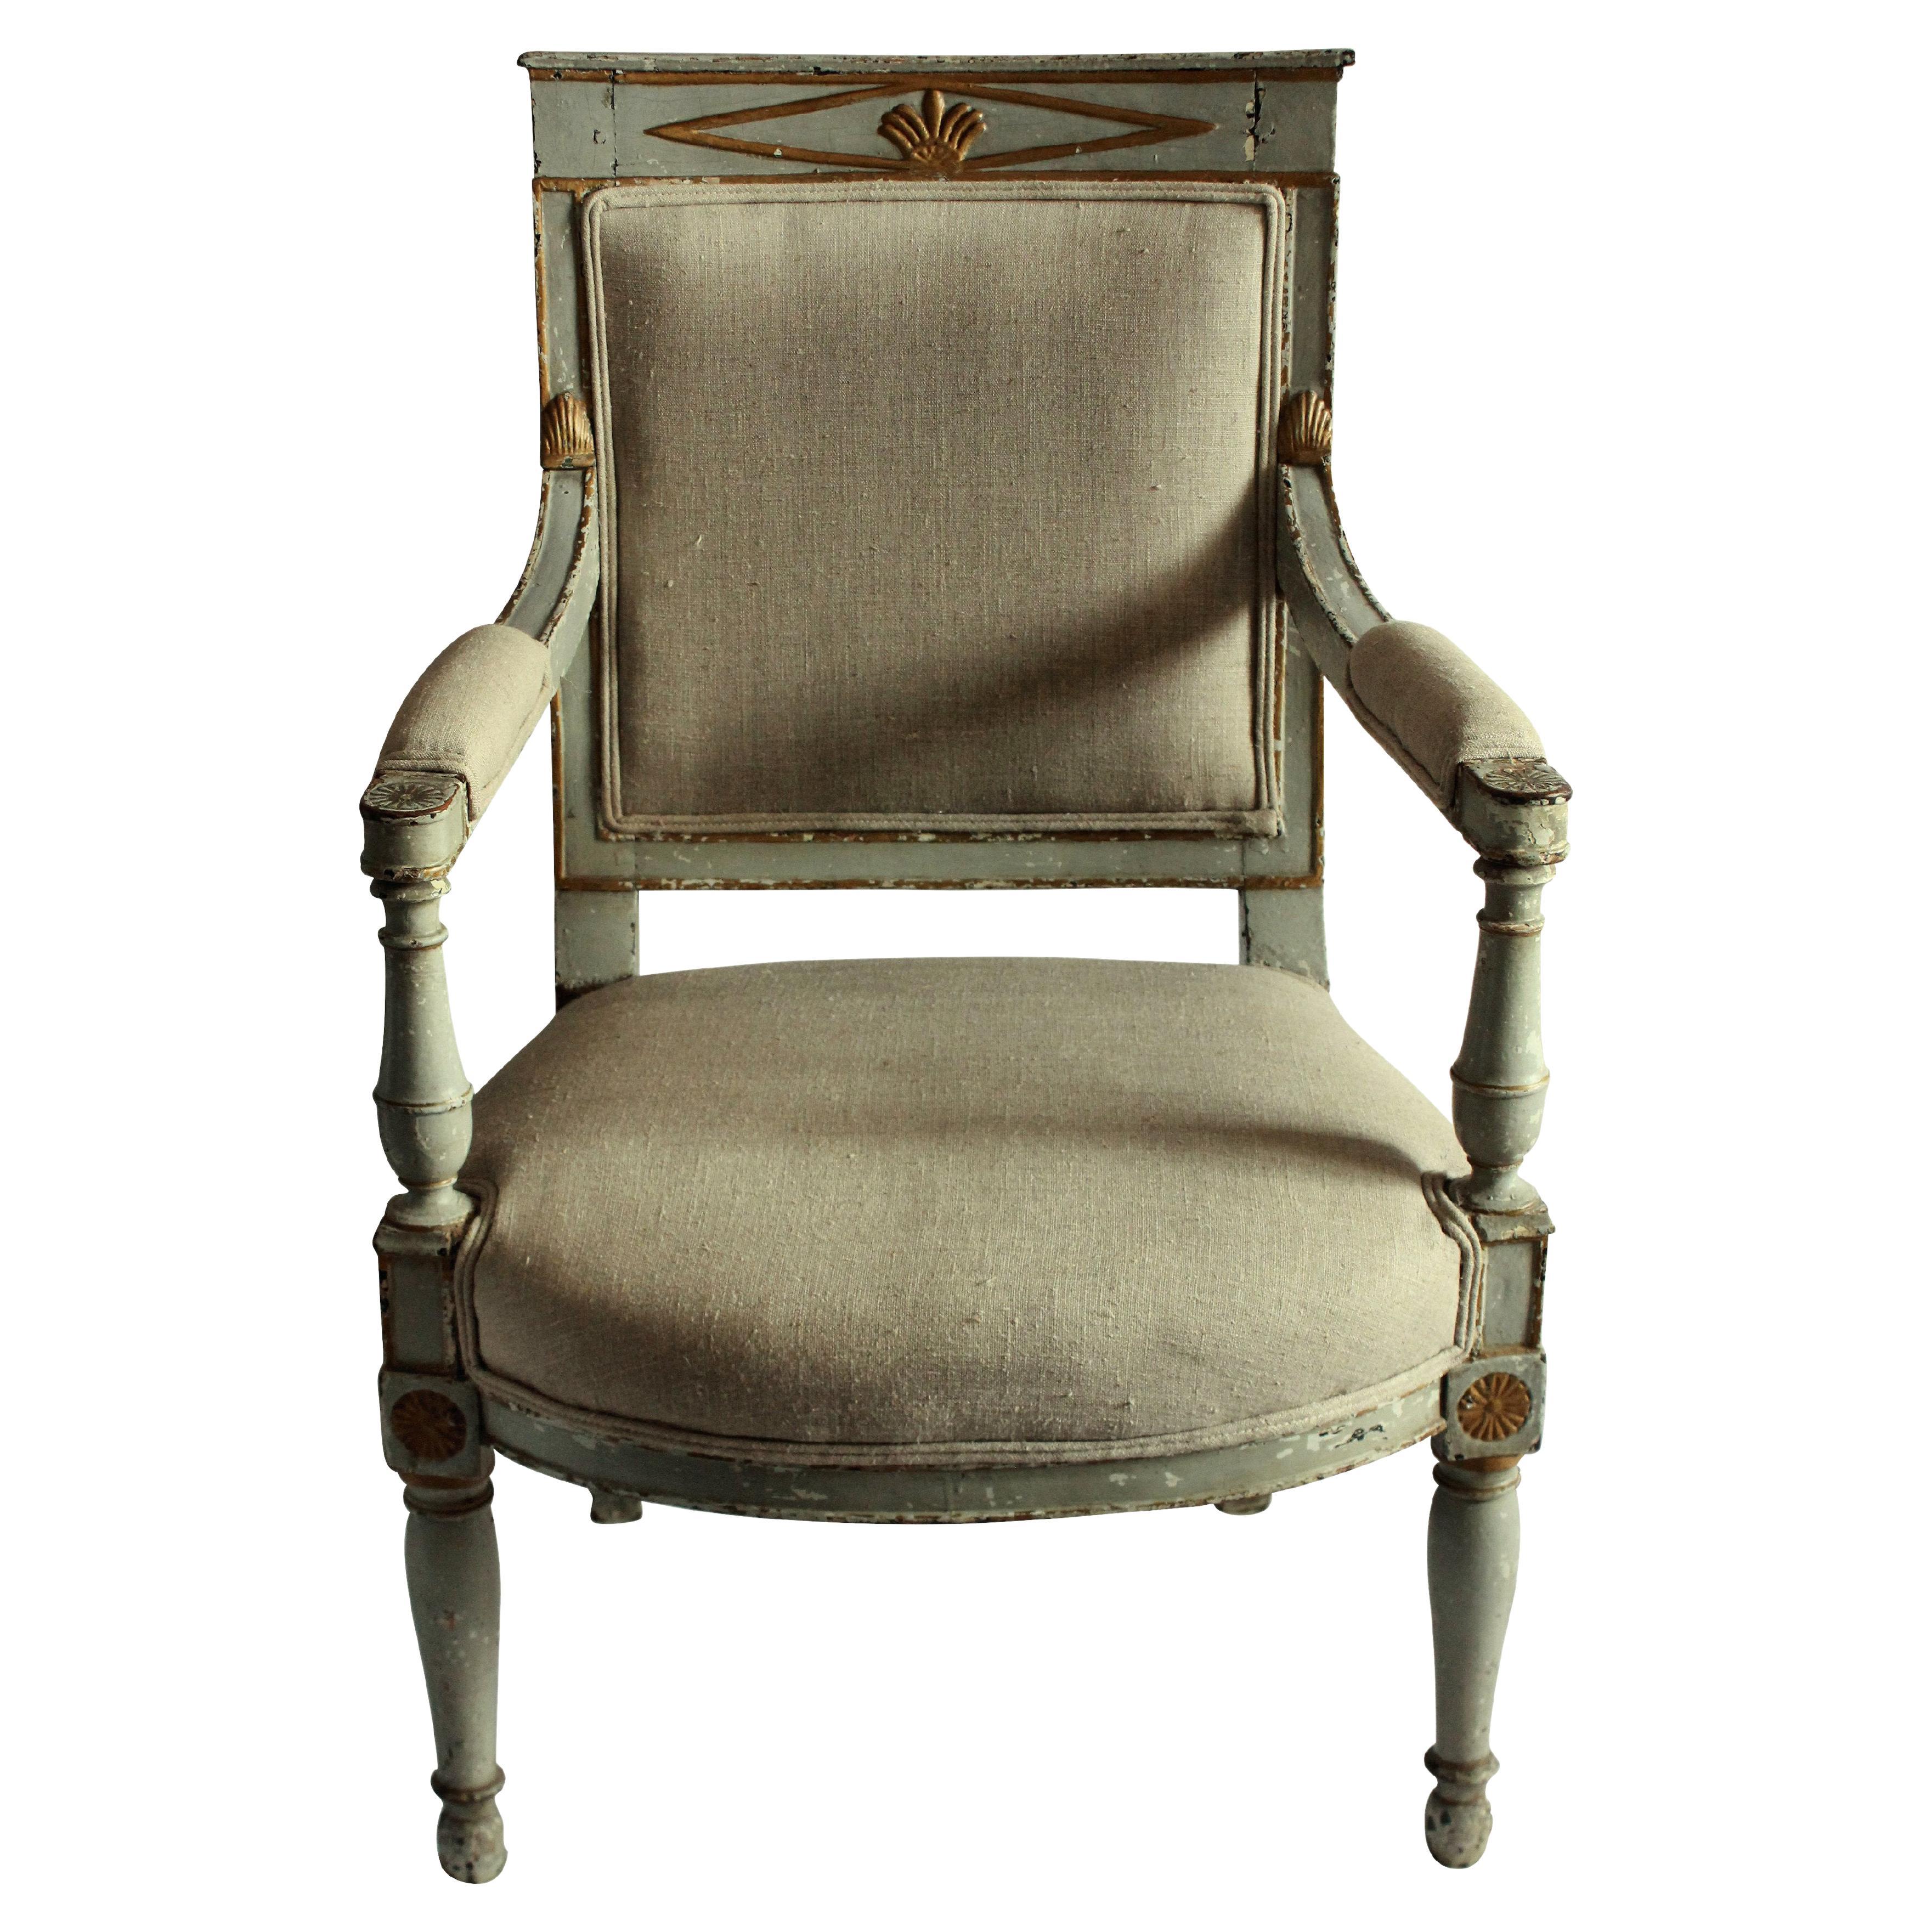 Early 19th Century Swedish Desk Chair For Sale